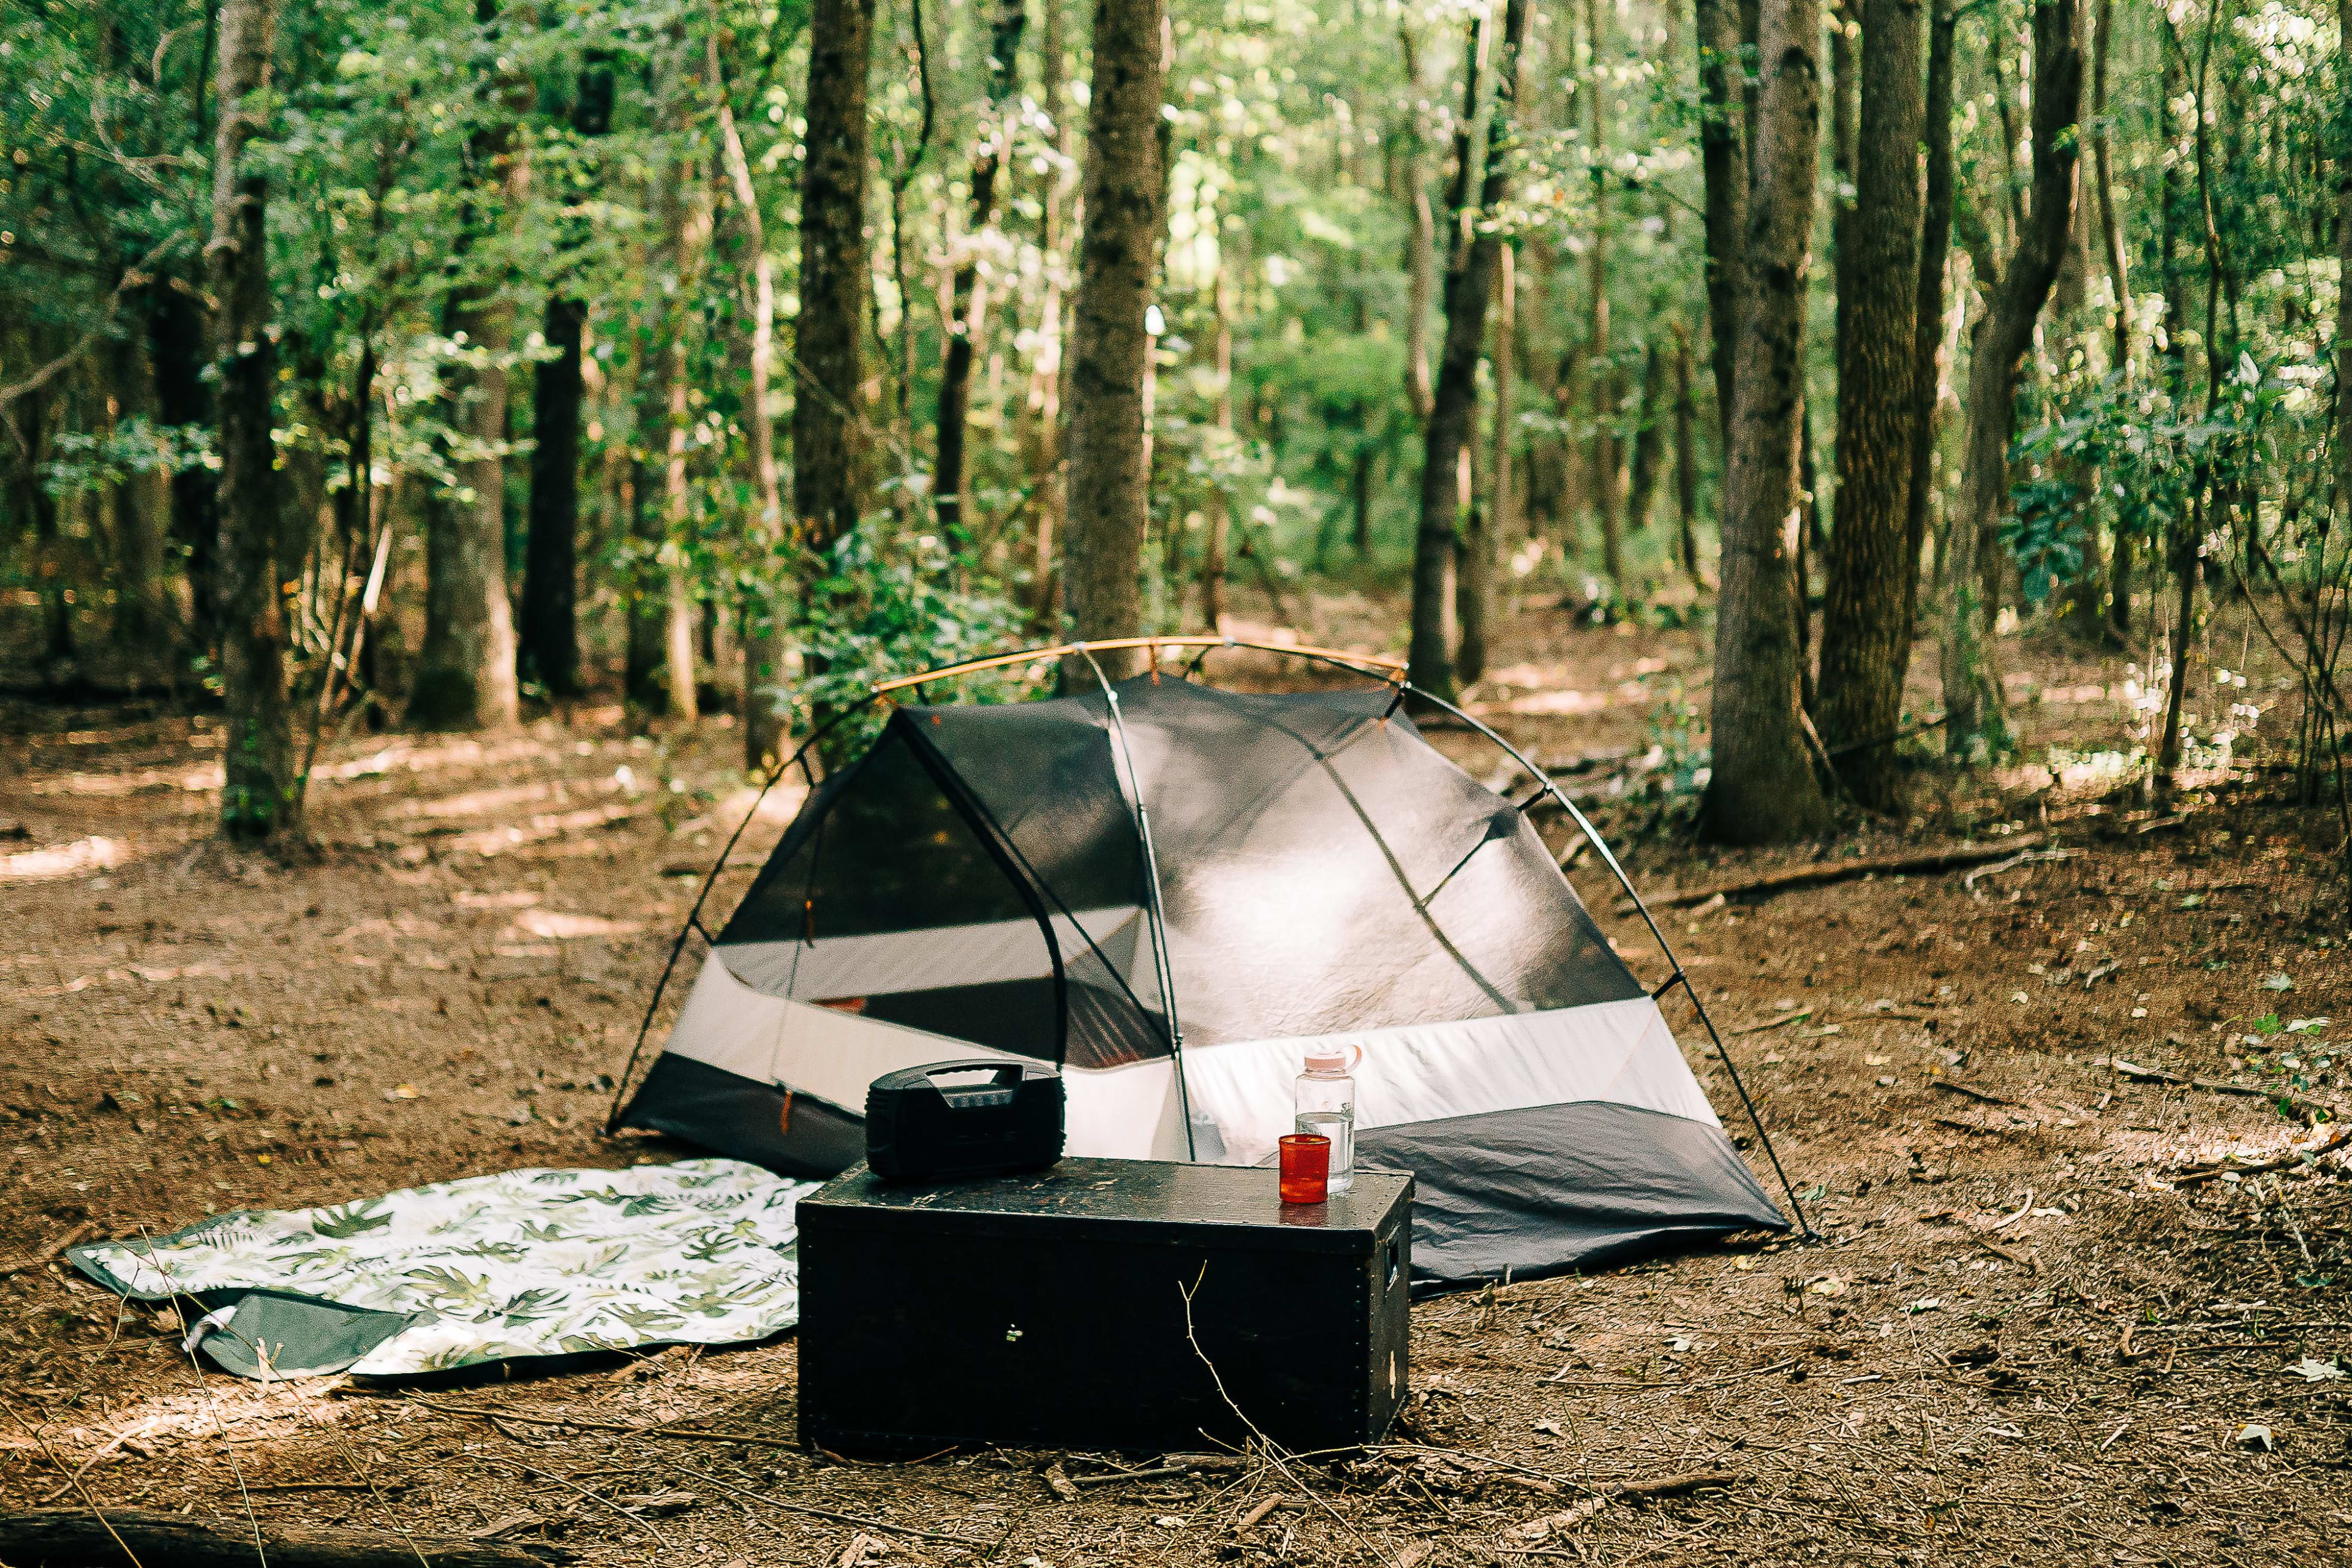 Our set up, nestled in the pines.